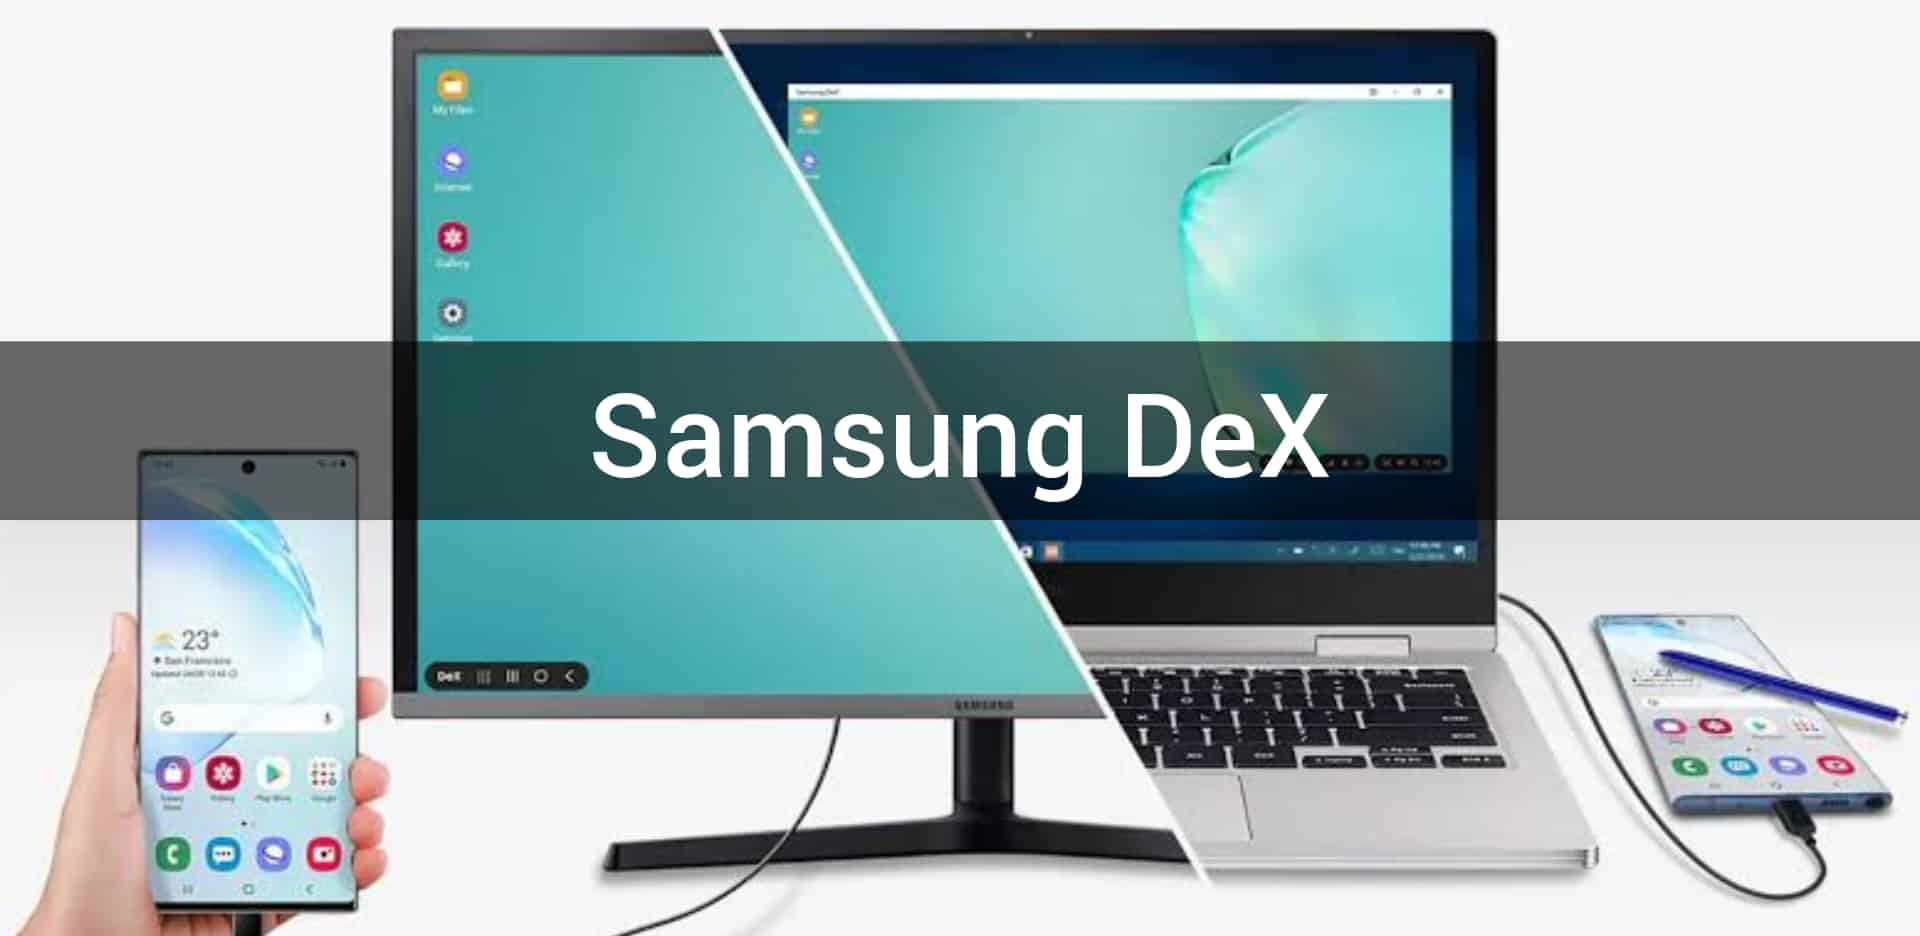 One UI 3.1 Brings Wireless Samsung DeX Support to More Galaxy Phones